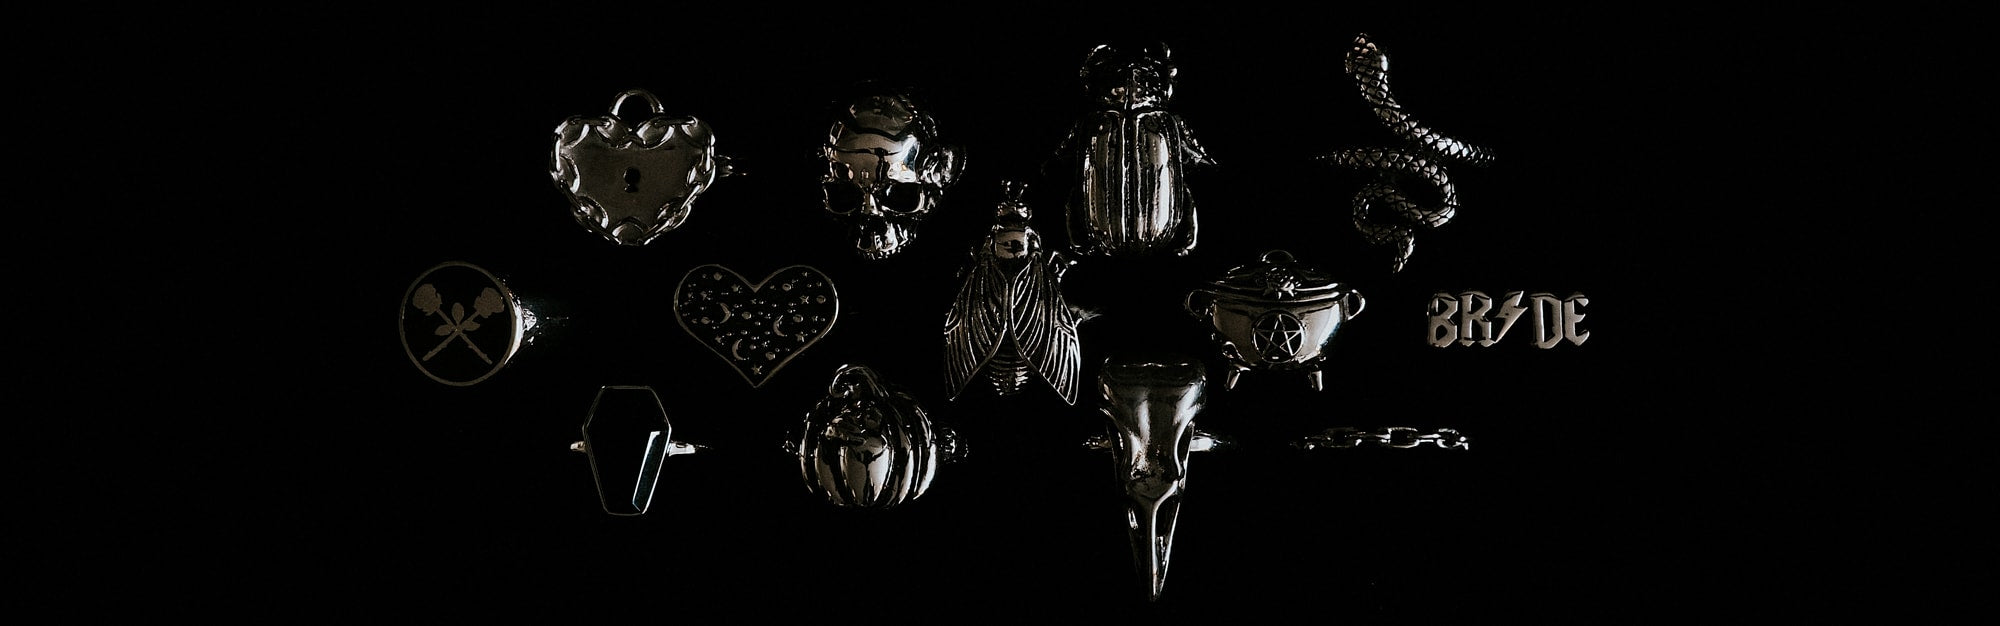 Can’t get enough of Gothic Rings? We get the obsession. Gothic rings are our passion. Whether you're looking for a Gothic statement ring or that unique insect inspired item, we've got you covered.